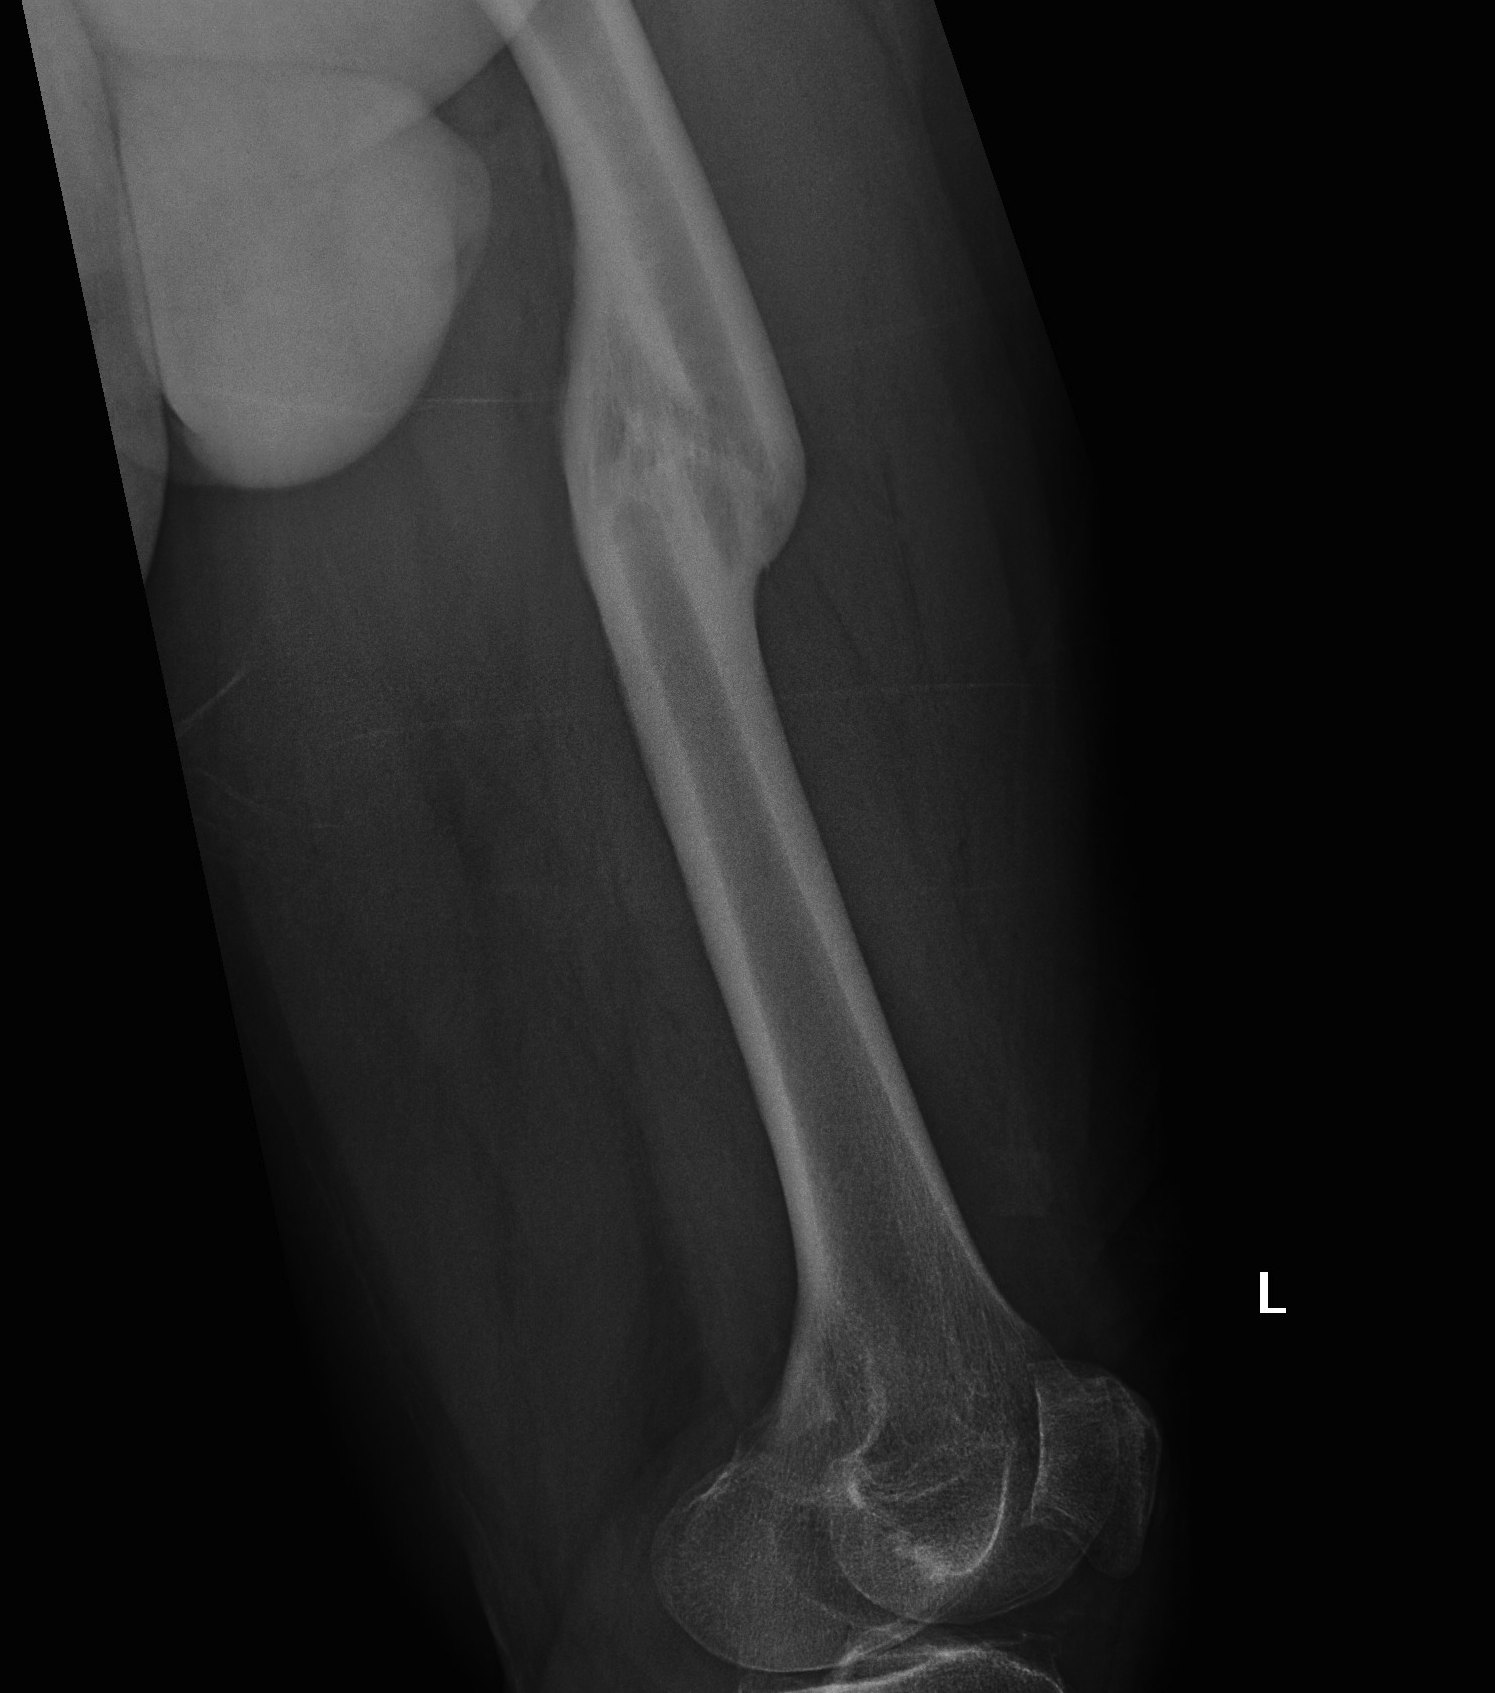 TKR Staged Osteotomy Preop 2